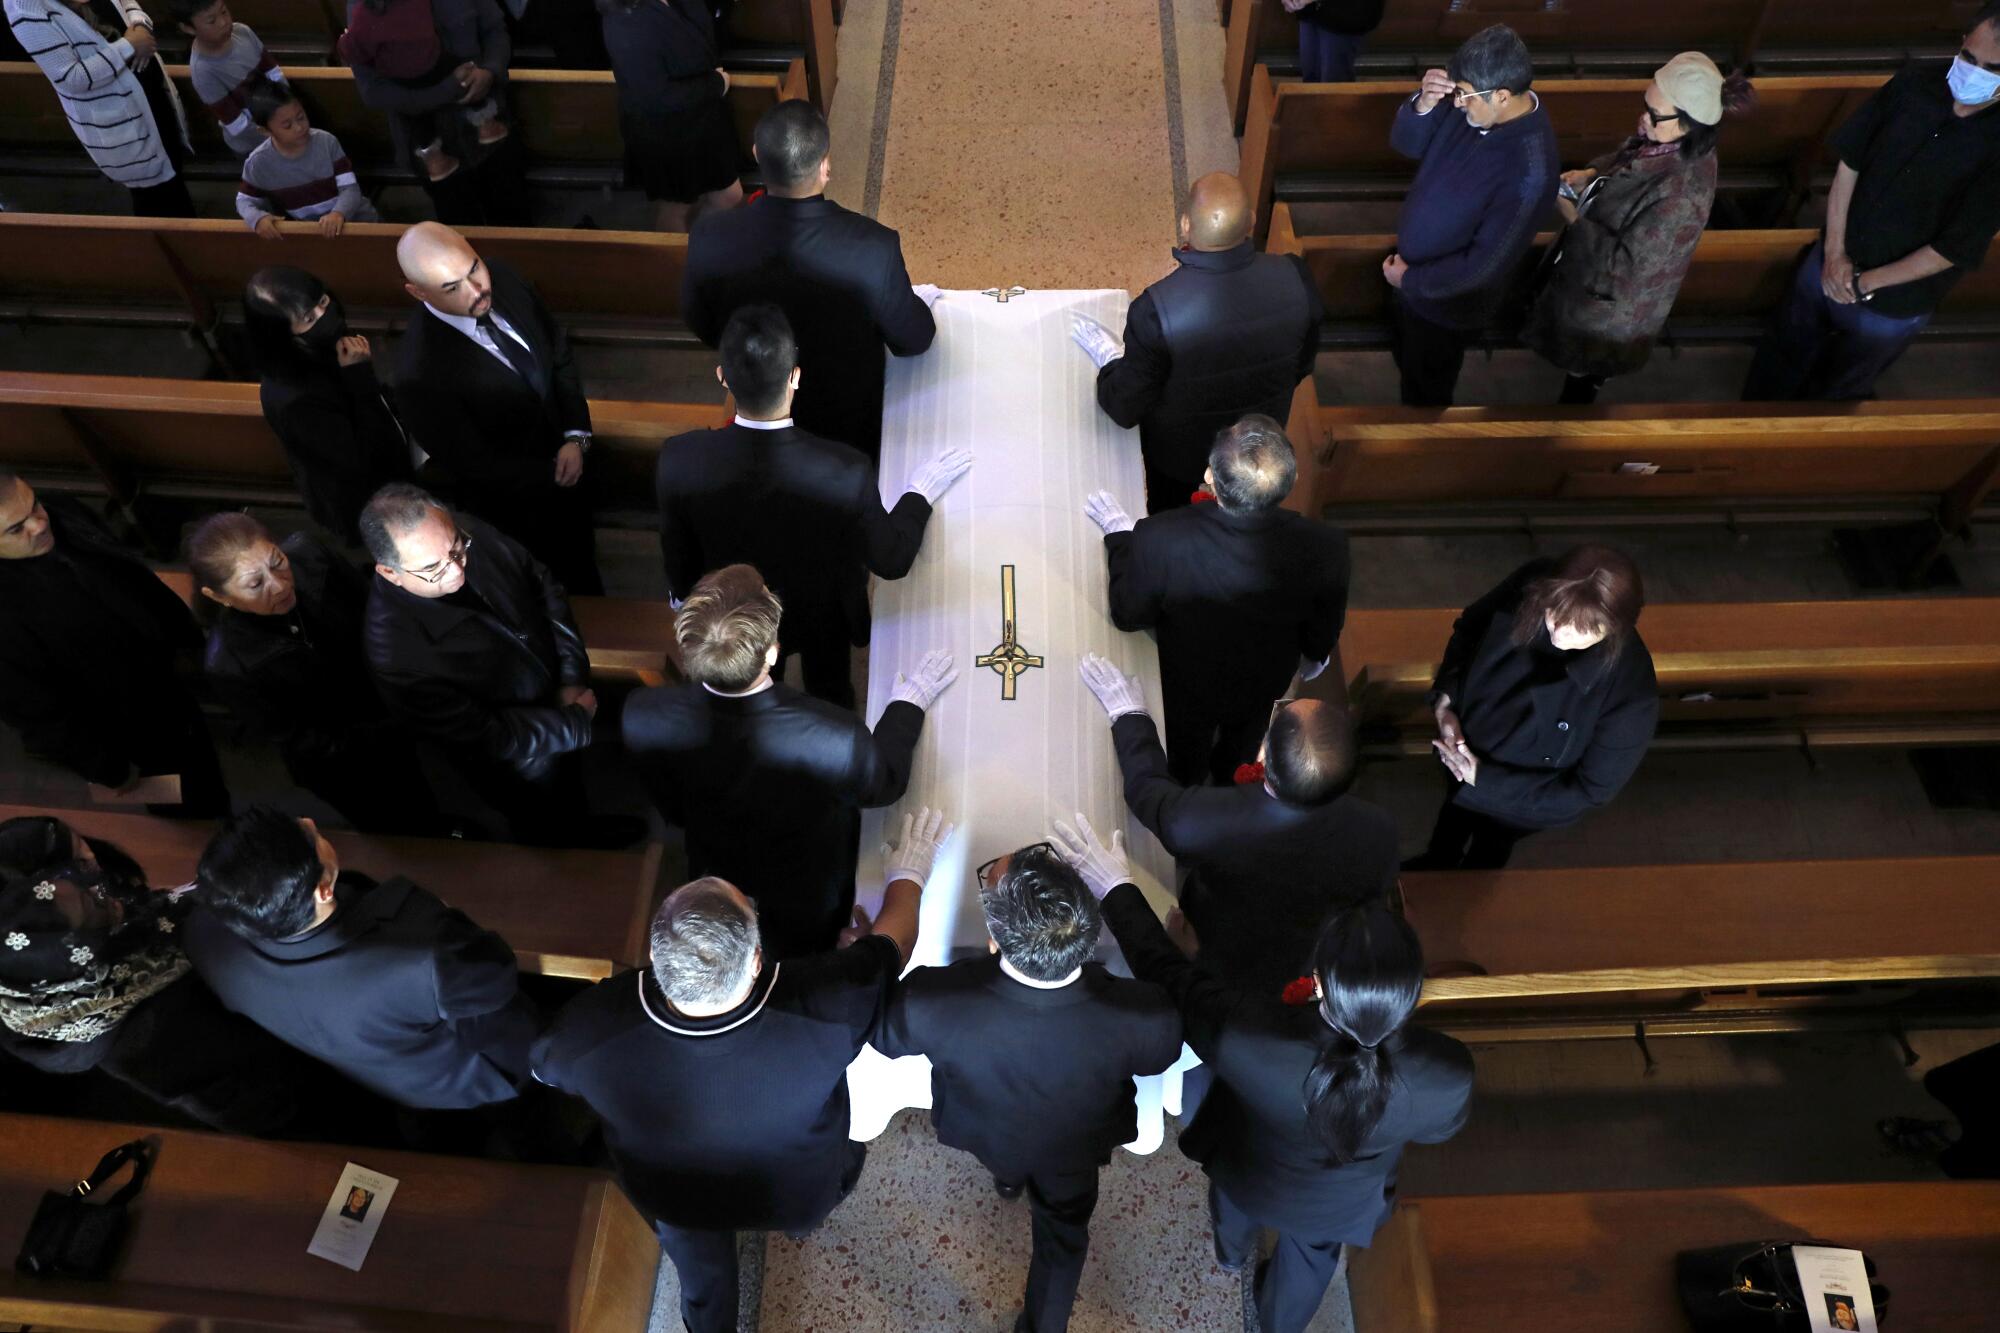 A view from above of people in dark suits flanking a white coffin occupying the aisle between pews with people standing